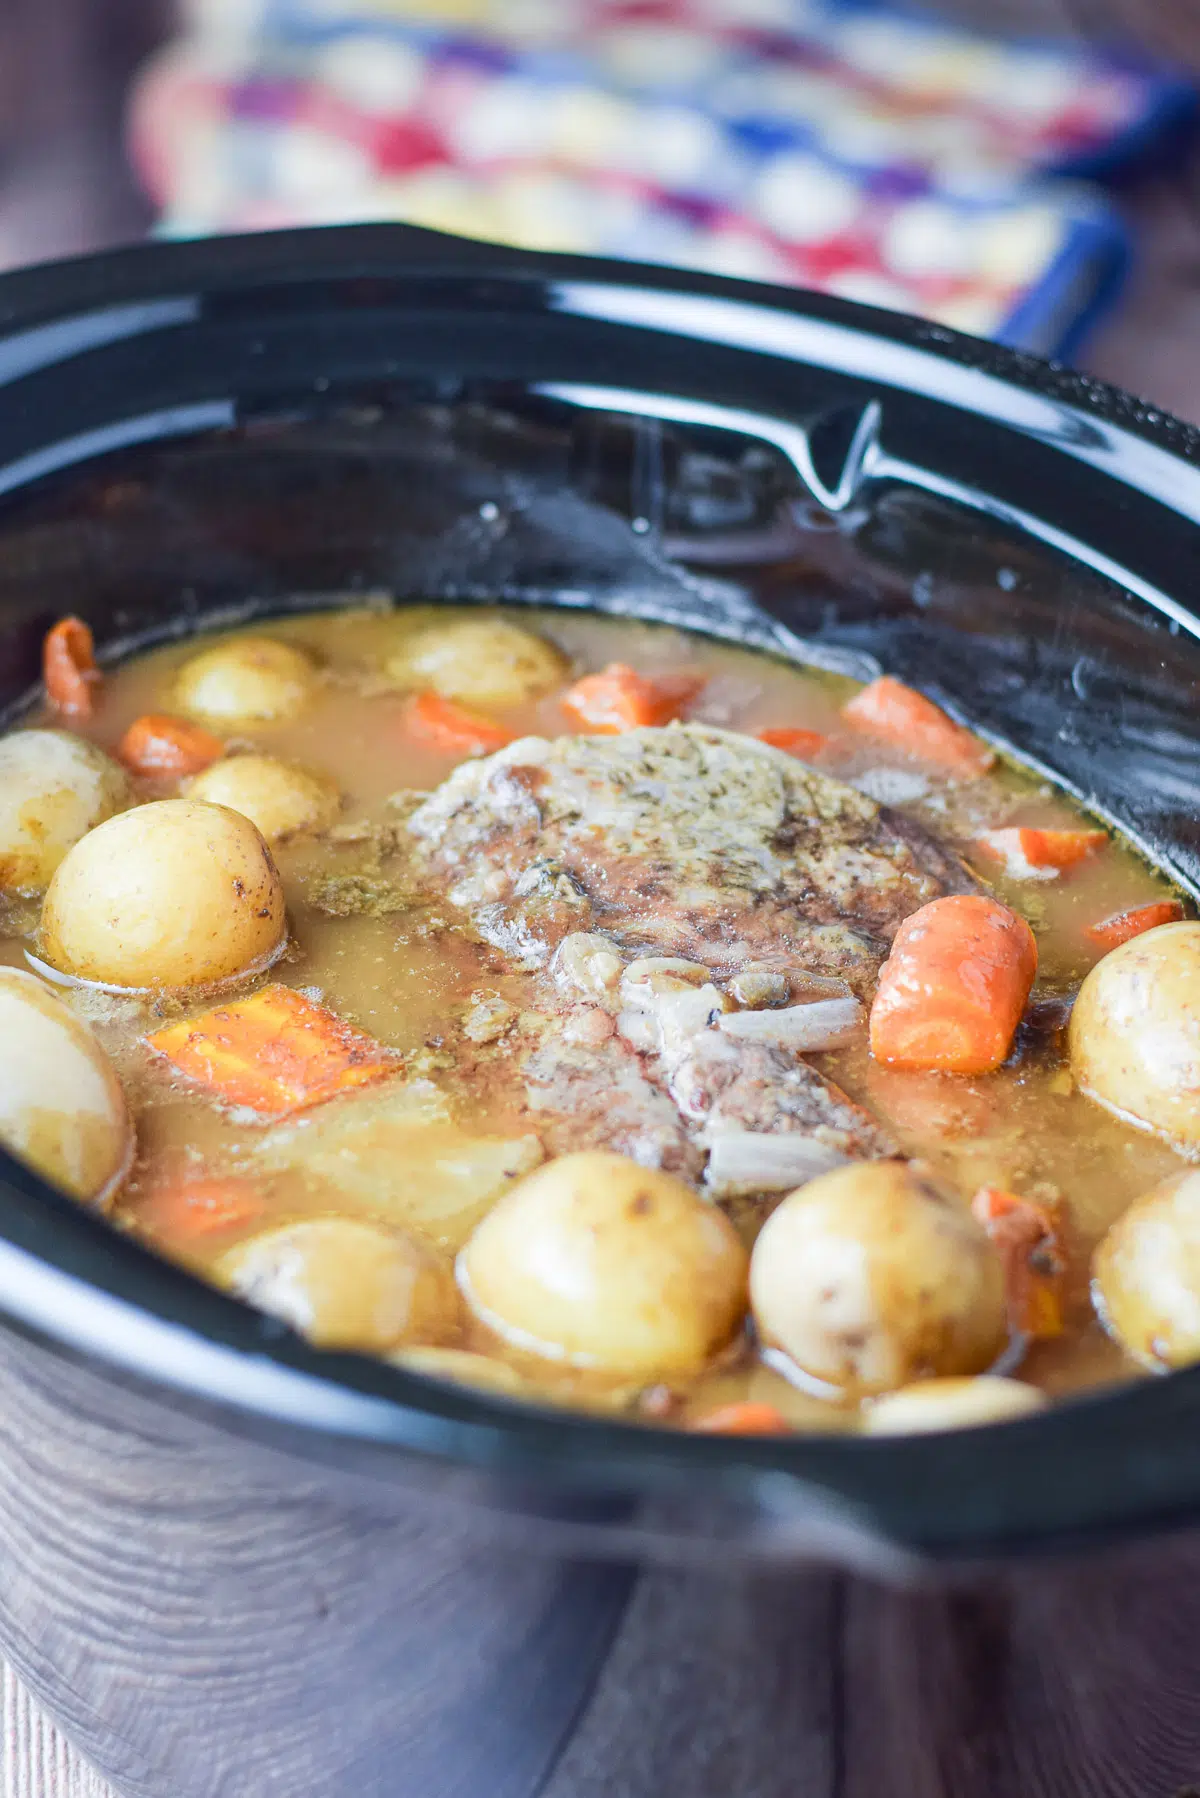 Crockpot with the pot roast, vegetables, and gravy